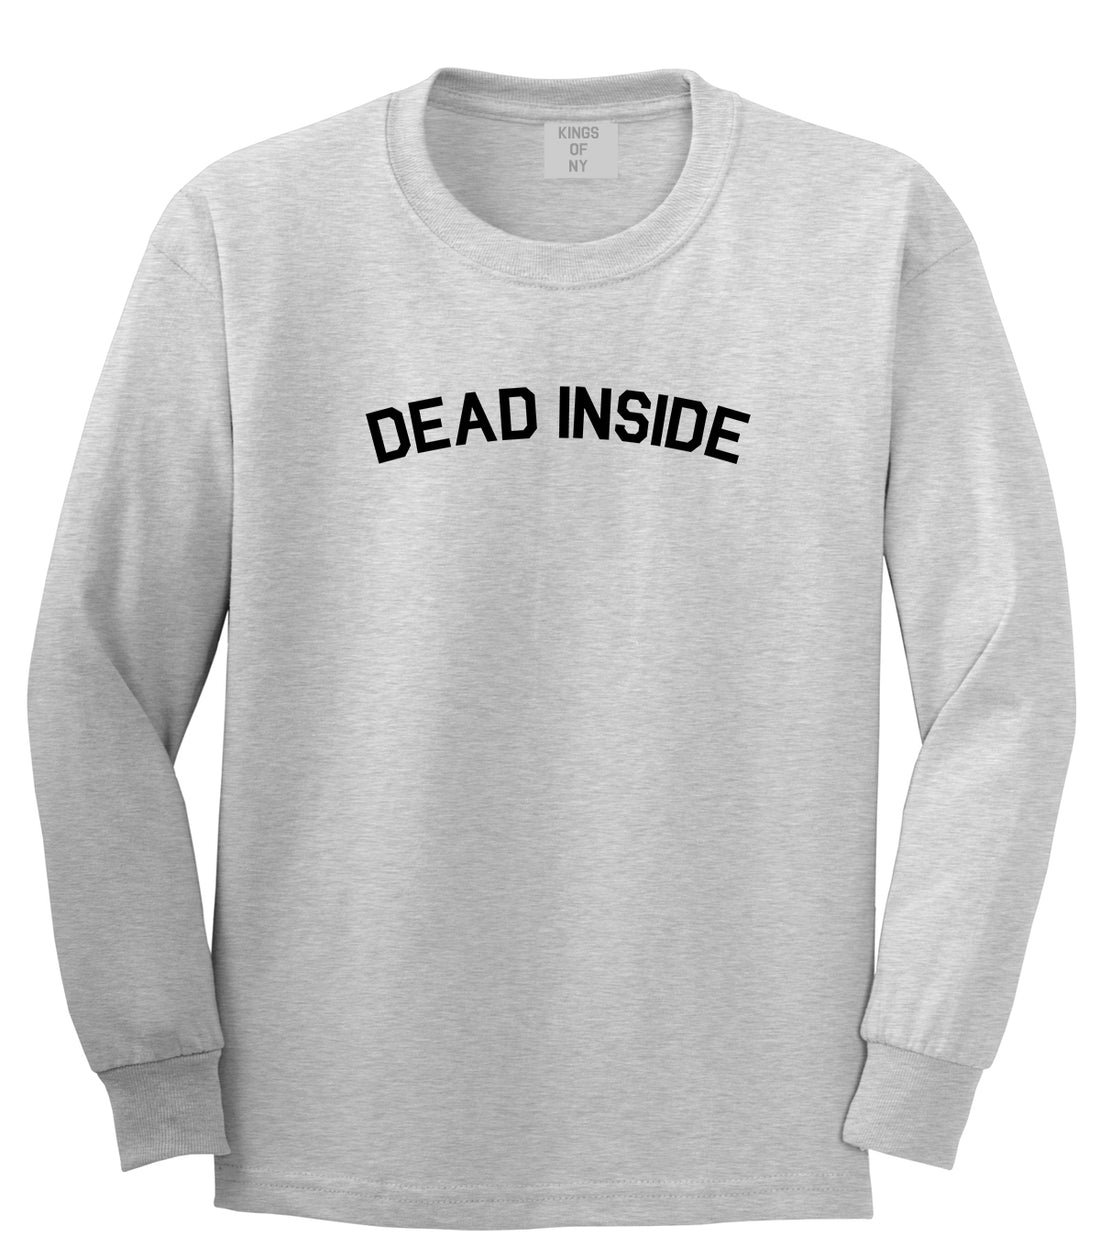 Dead Inside Arch Mens Long Sleeve T-Shirt Grey by Kings Of NY